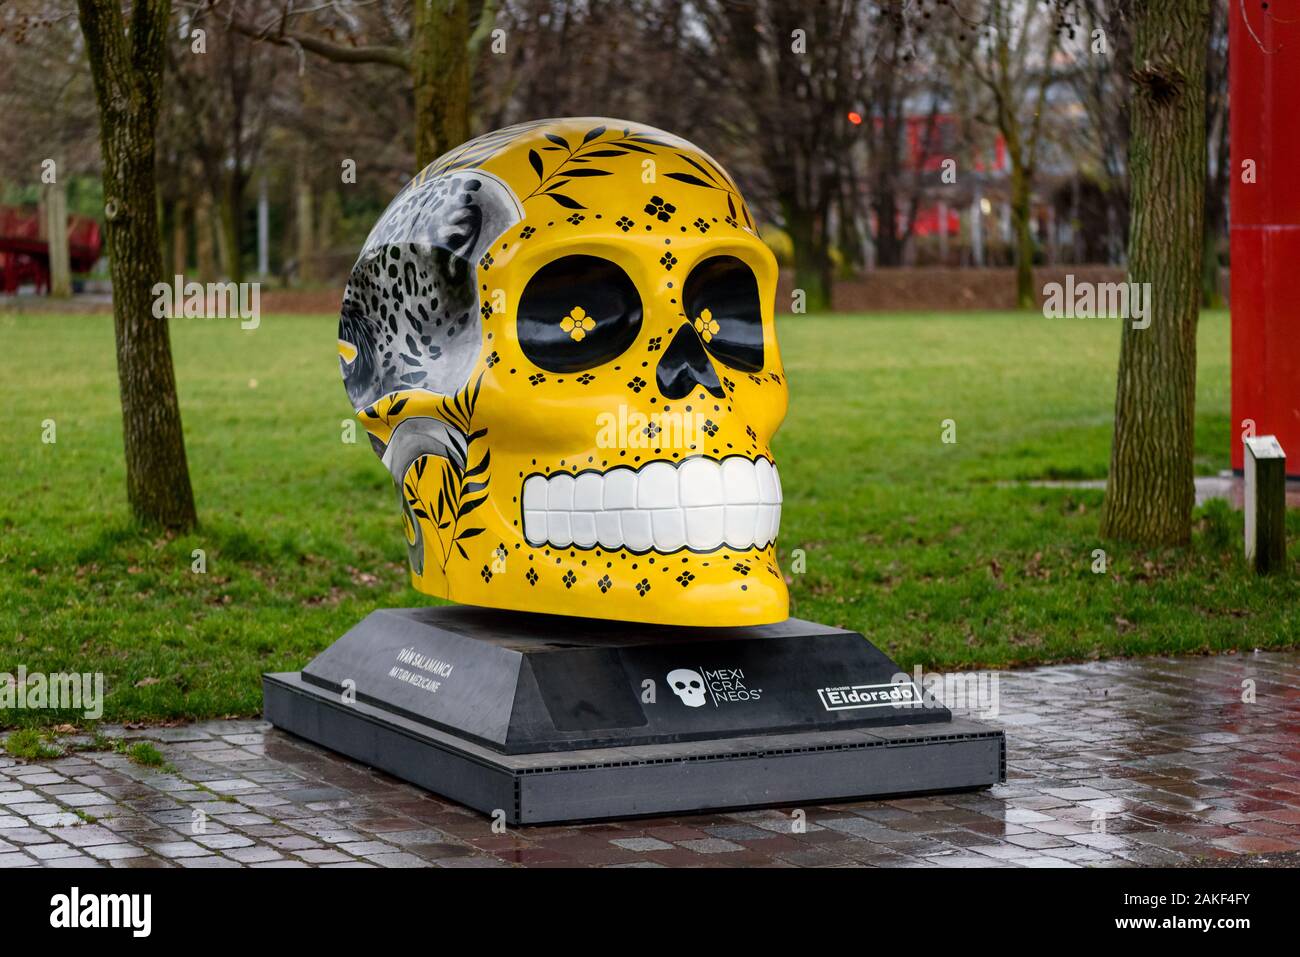 PARIS, FRANCE - JANUARY 8, 2020: 'Mexicraneos' exhibition of giant skulls painted and decorated by mexican artists held in the Parc de la Villette. Stock Photo